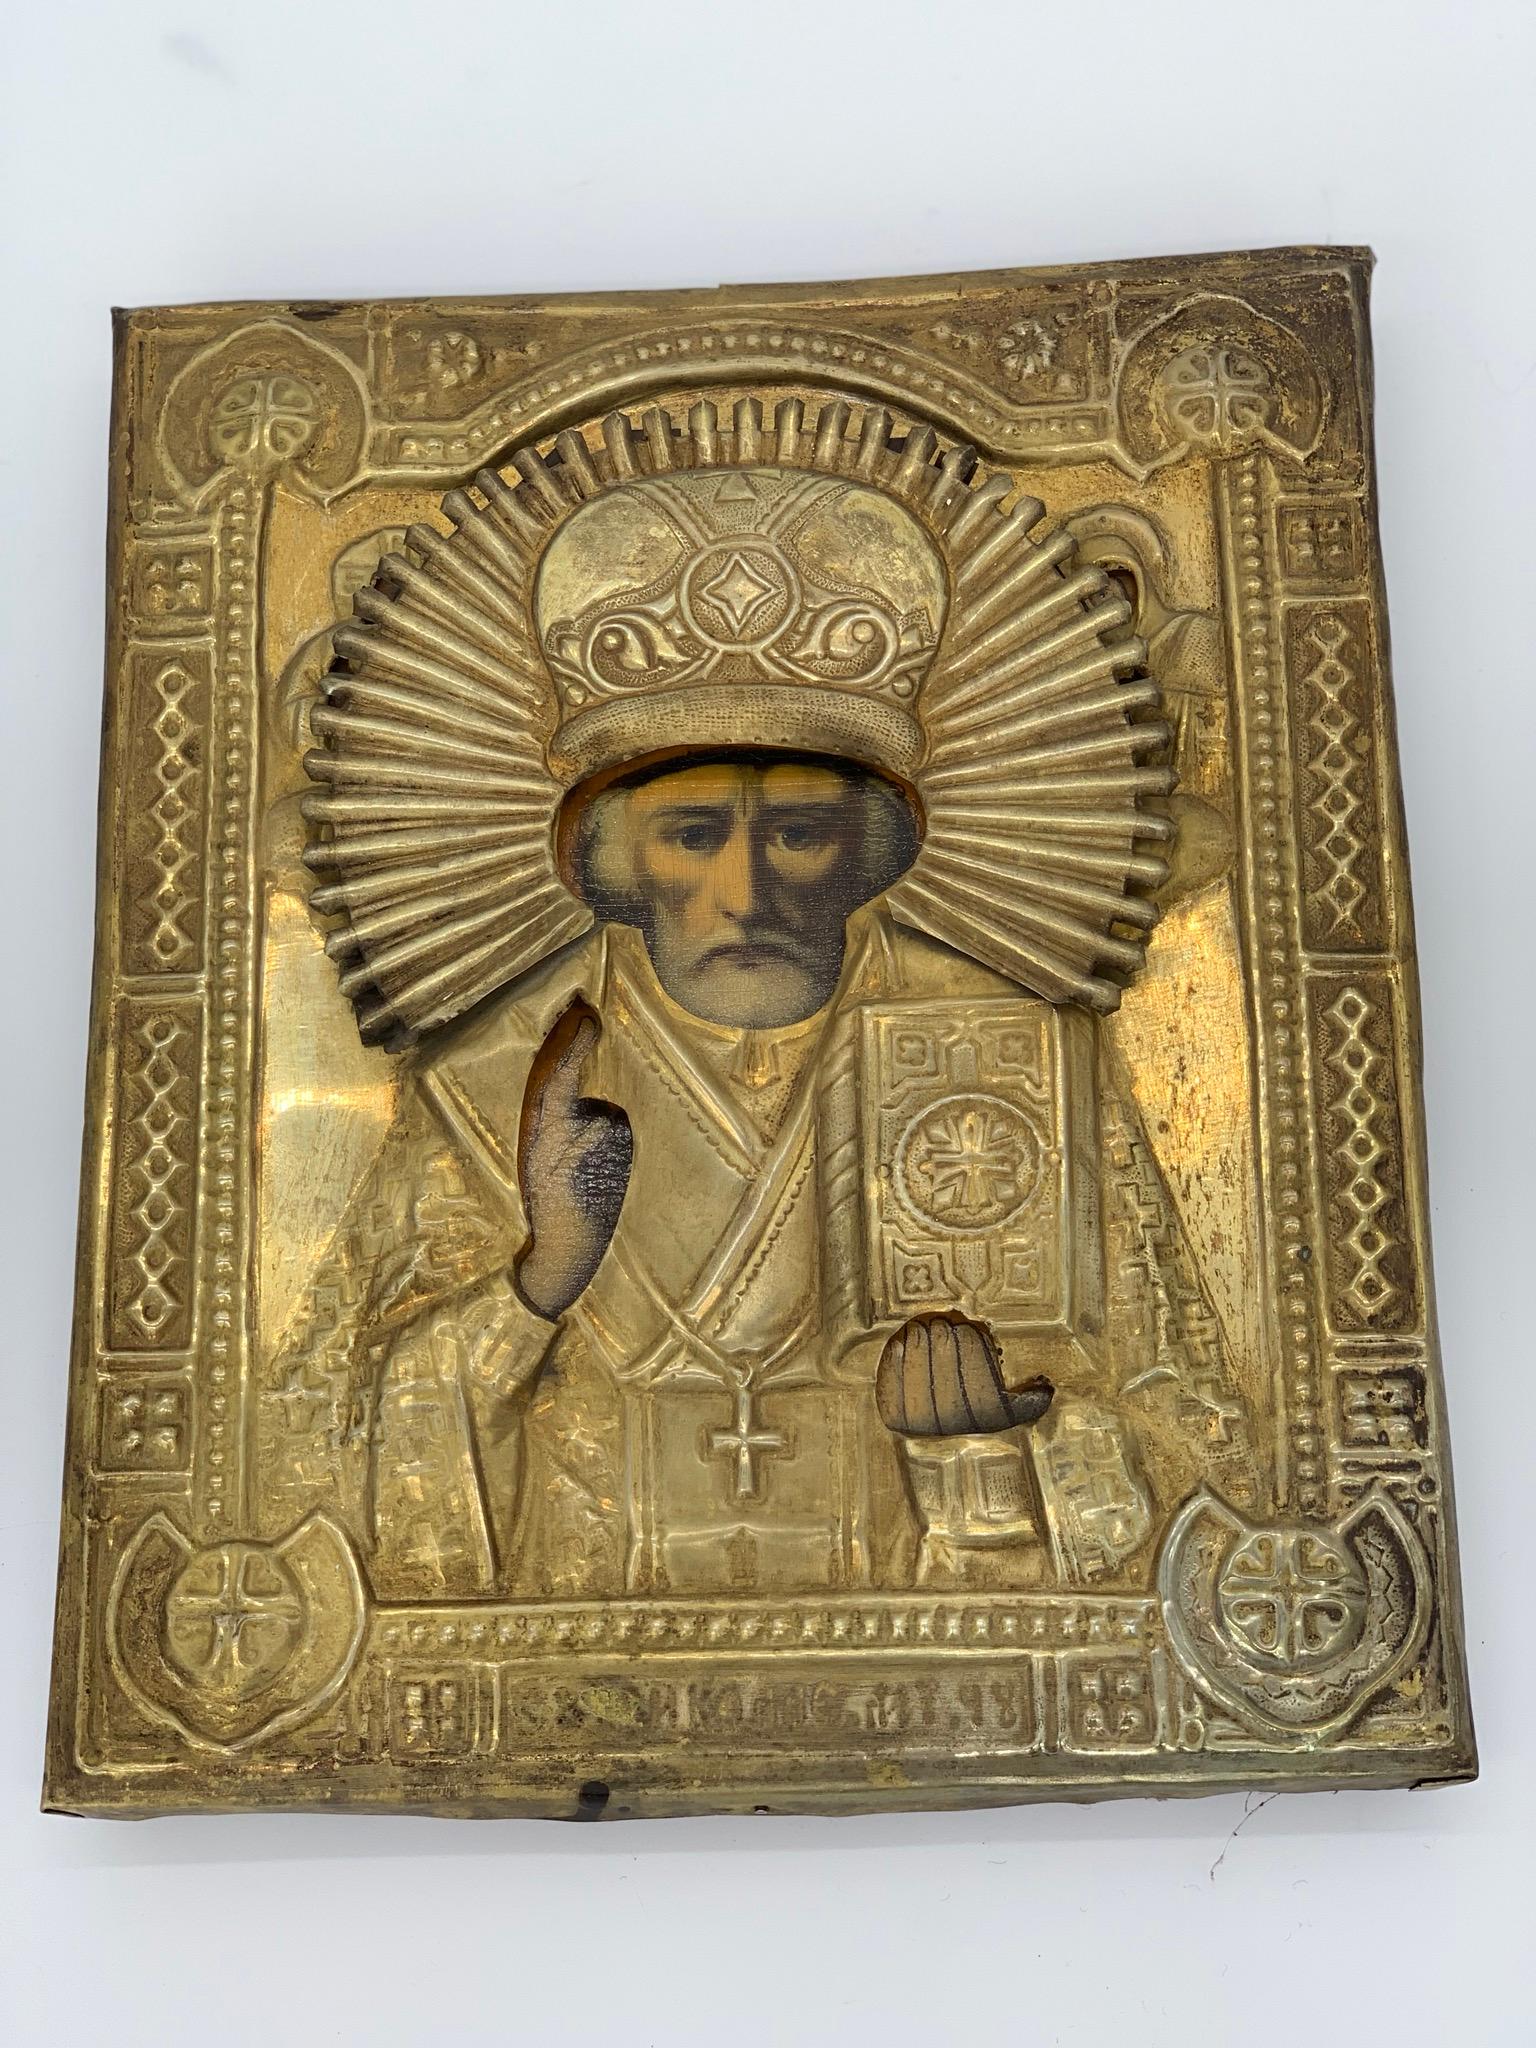 Beautiful gold brass icon of a bishop with halo and painting on wood.